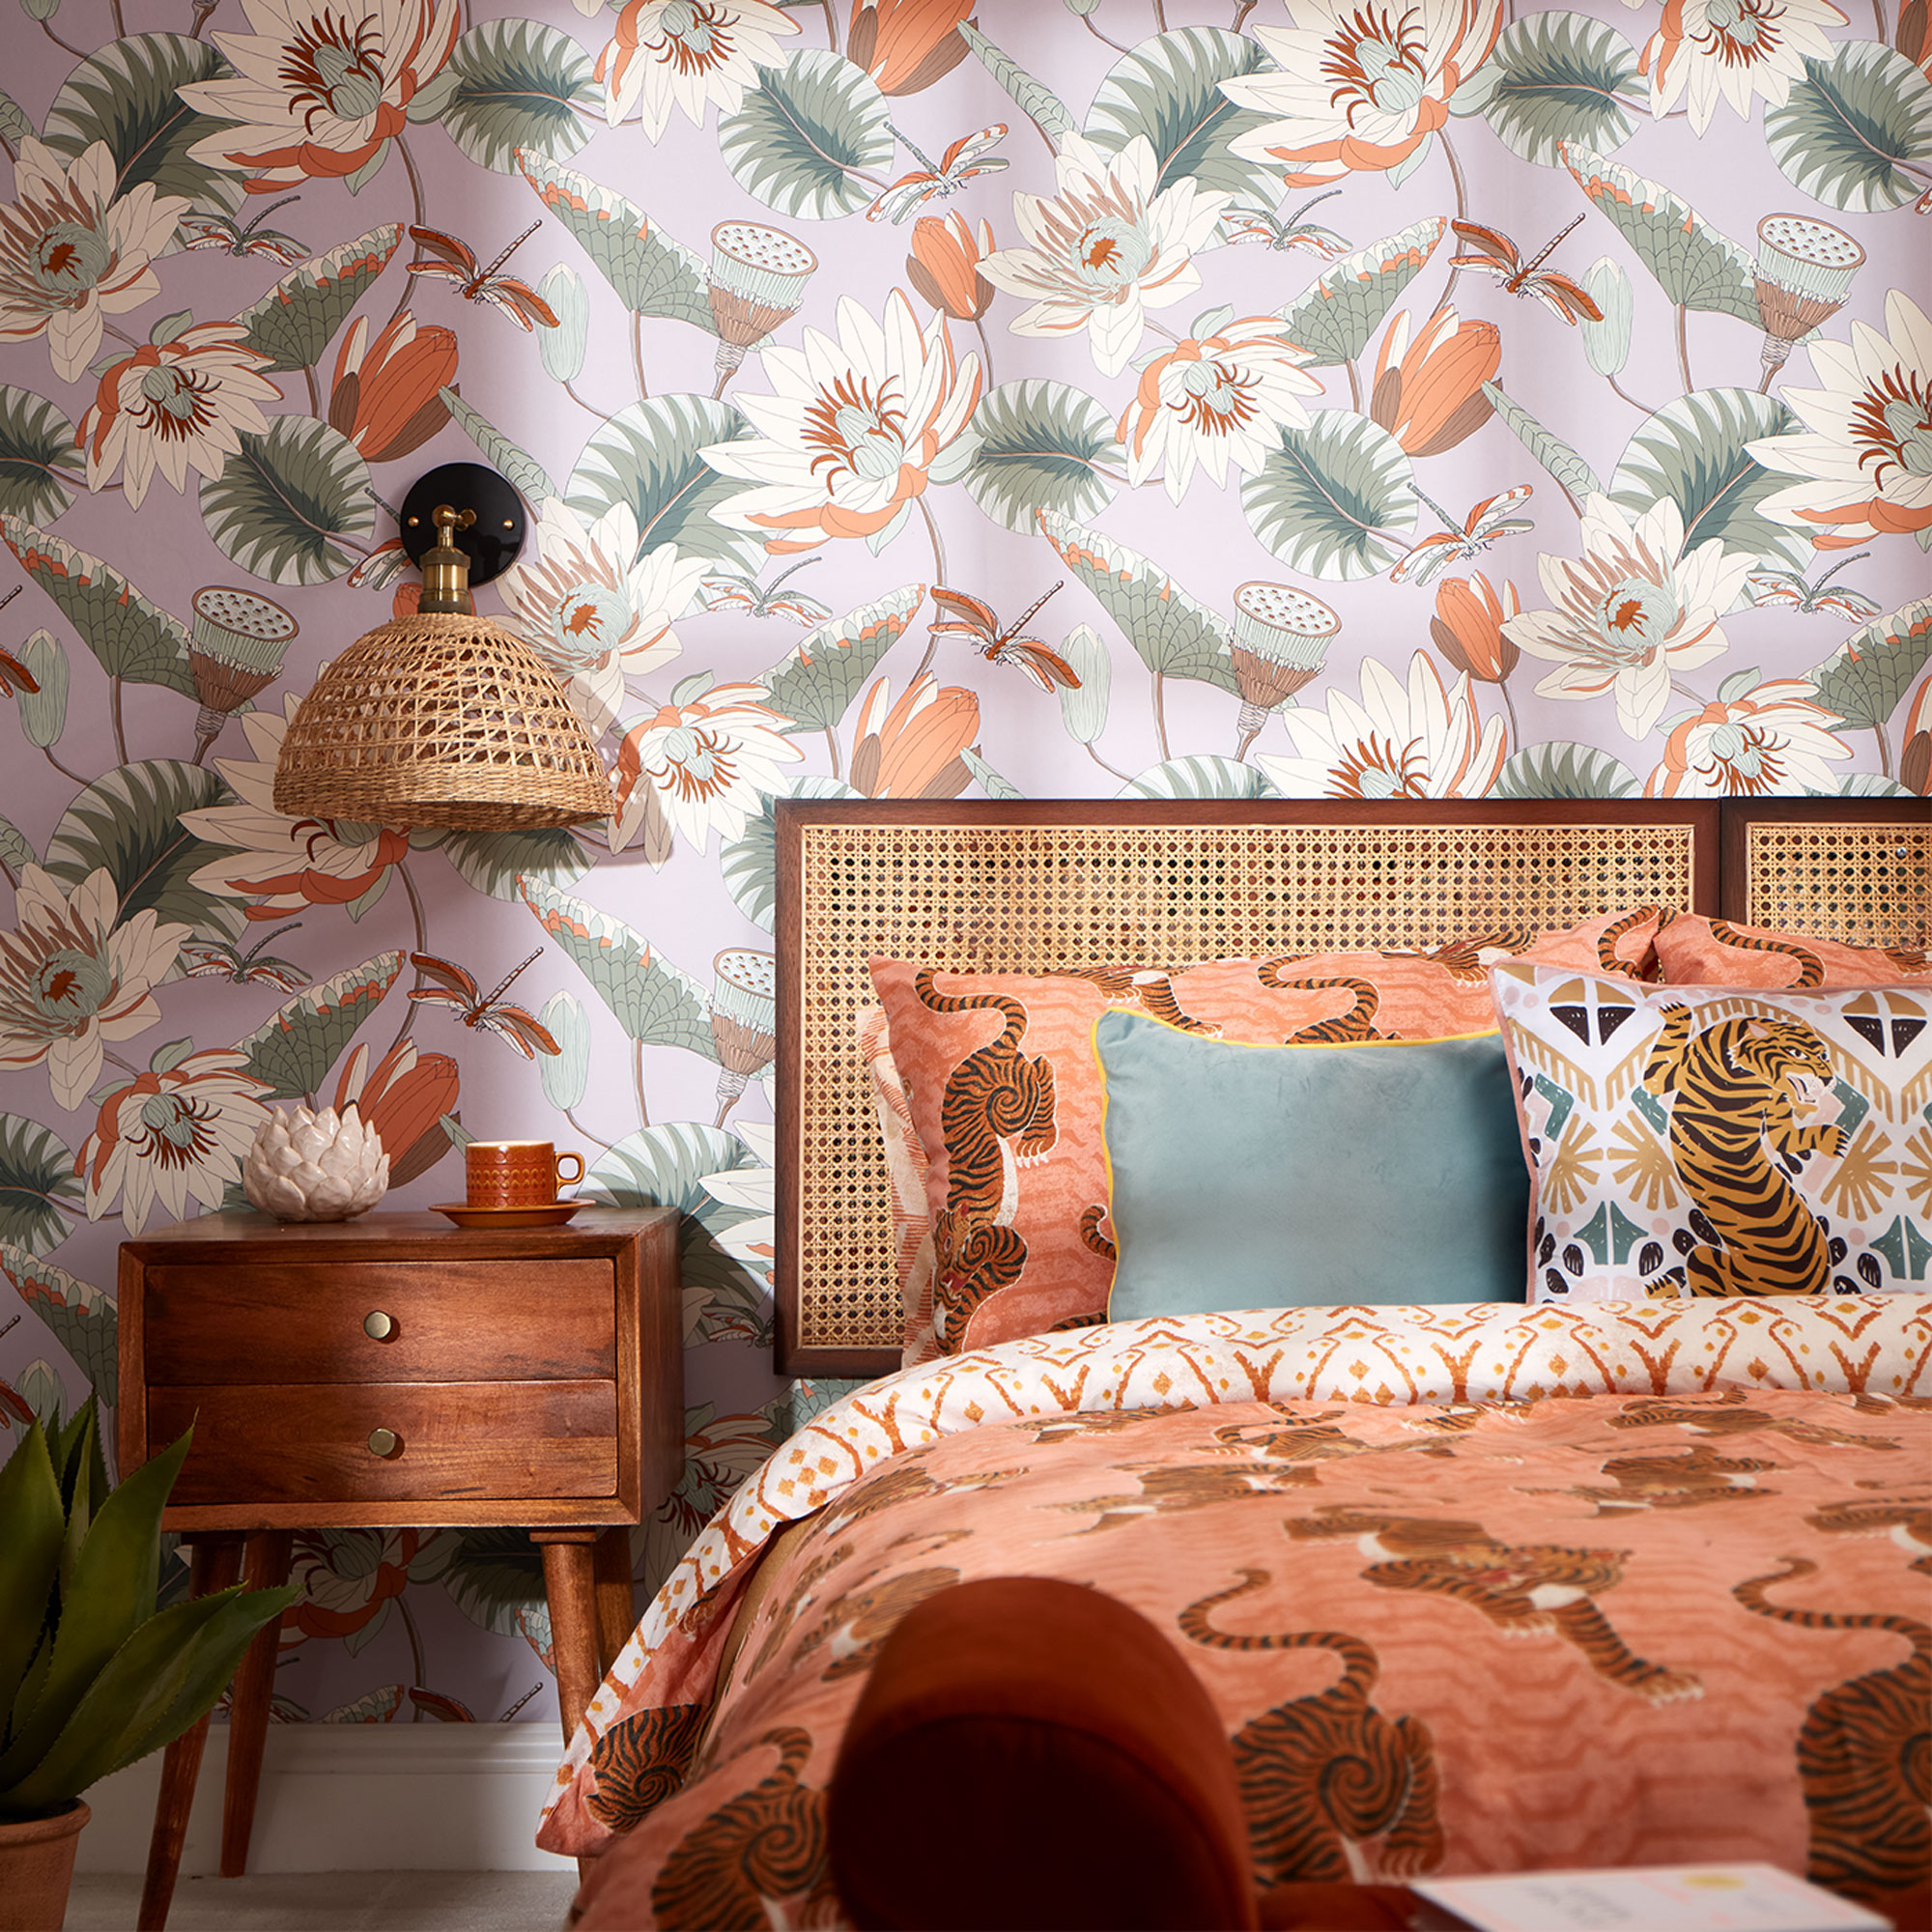 Super Modern Room Decorating Ideas with Retro Wallpapers